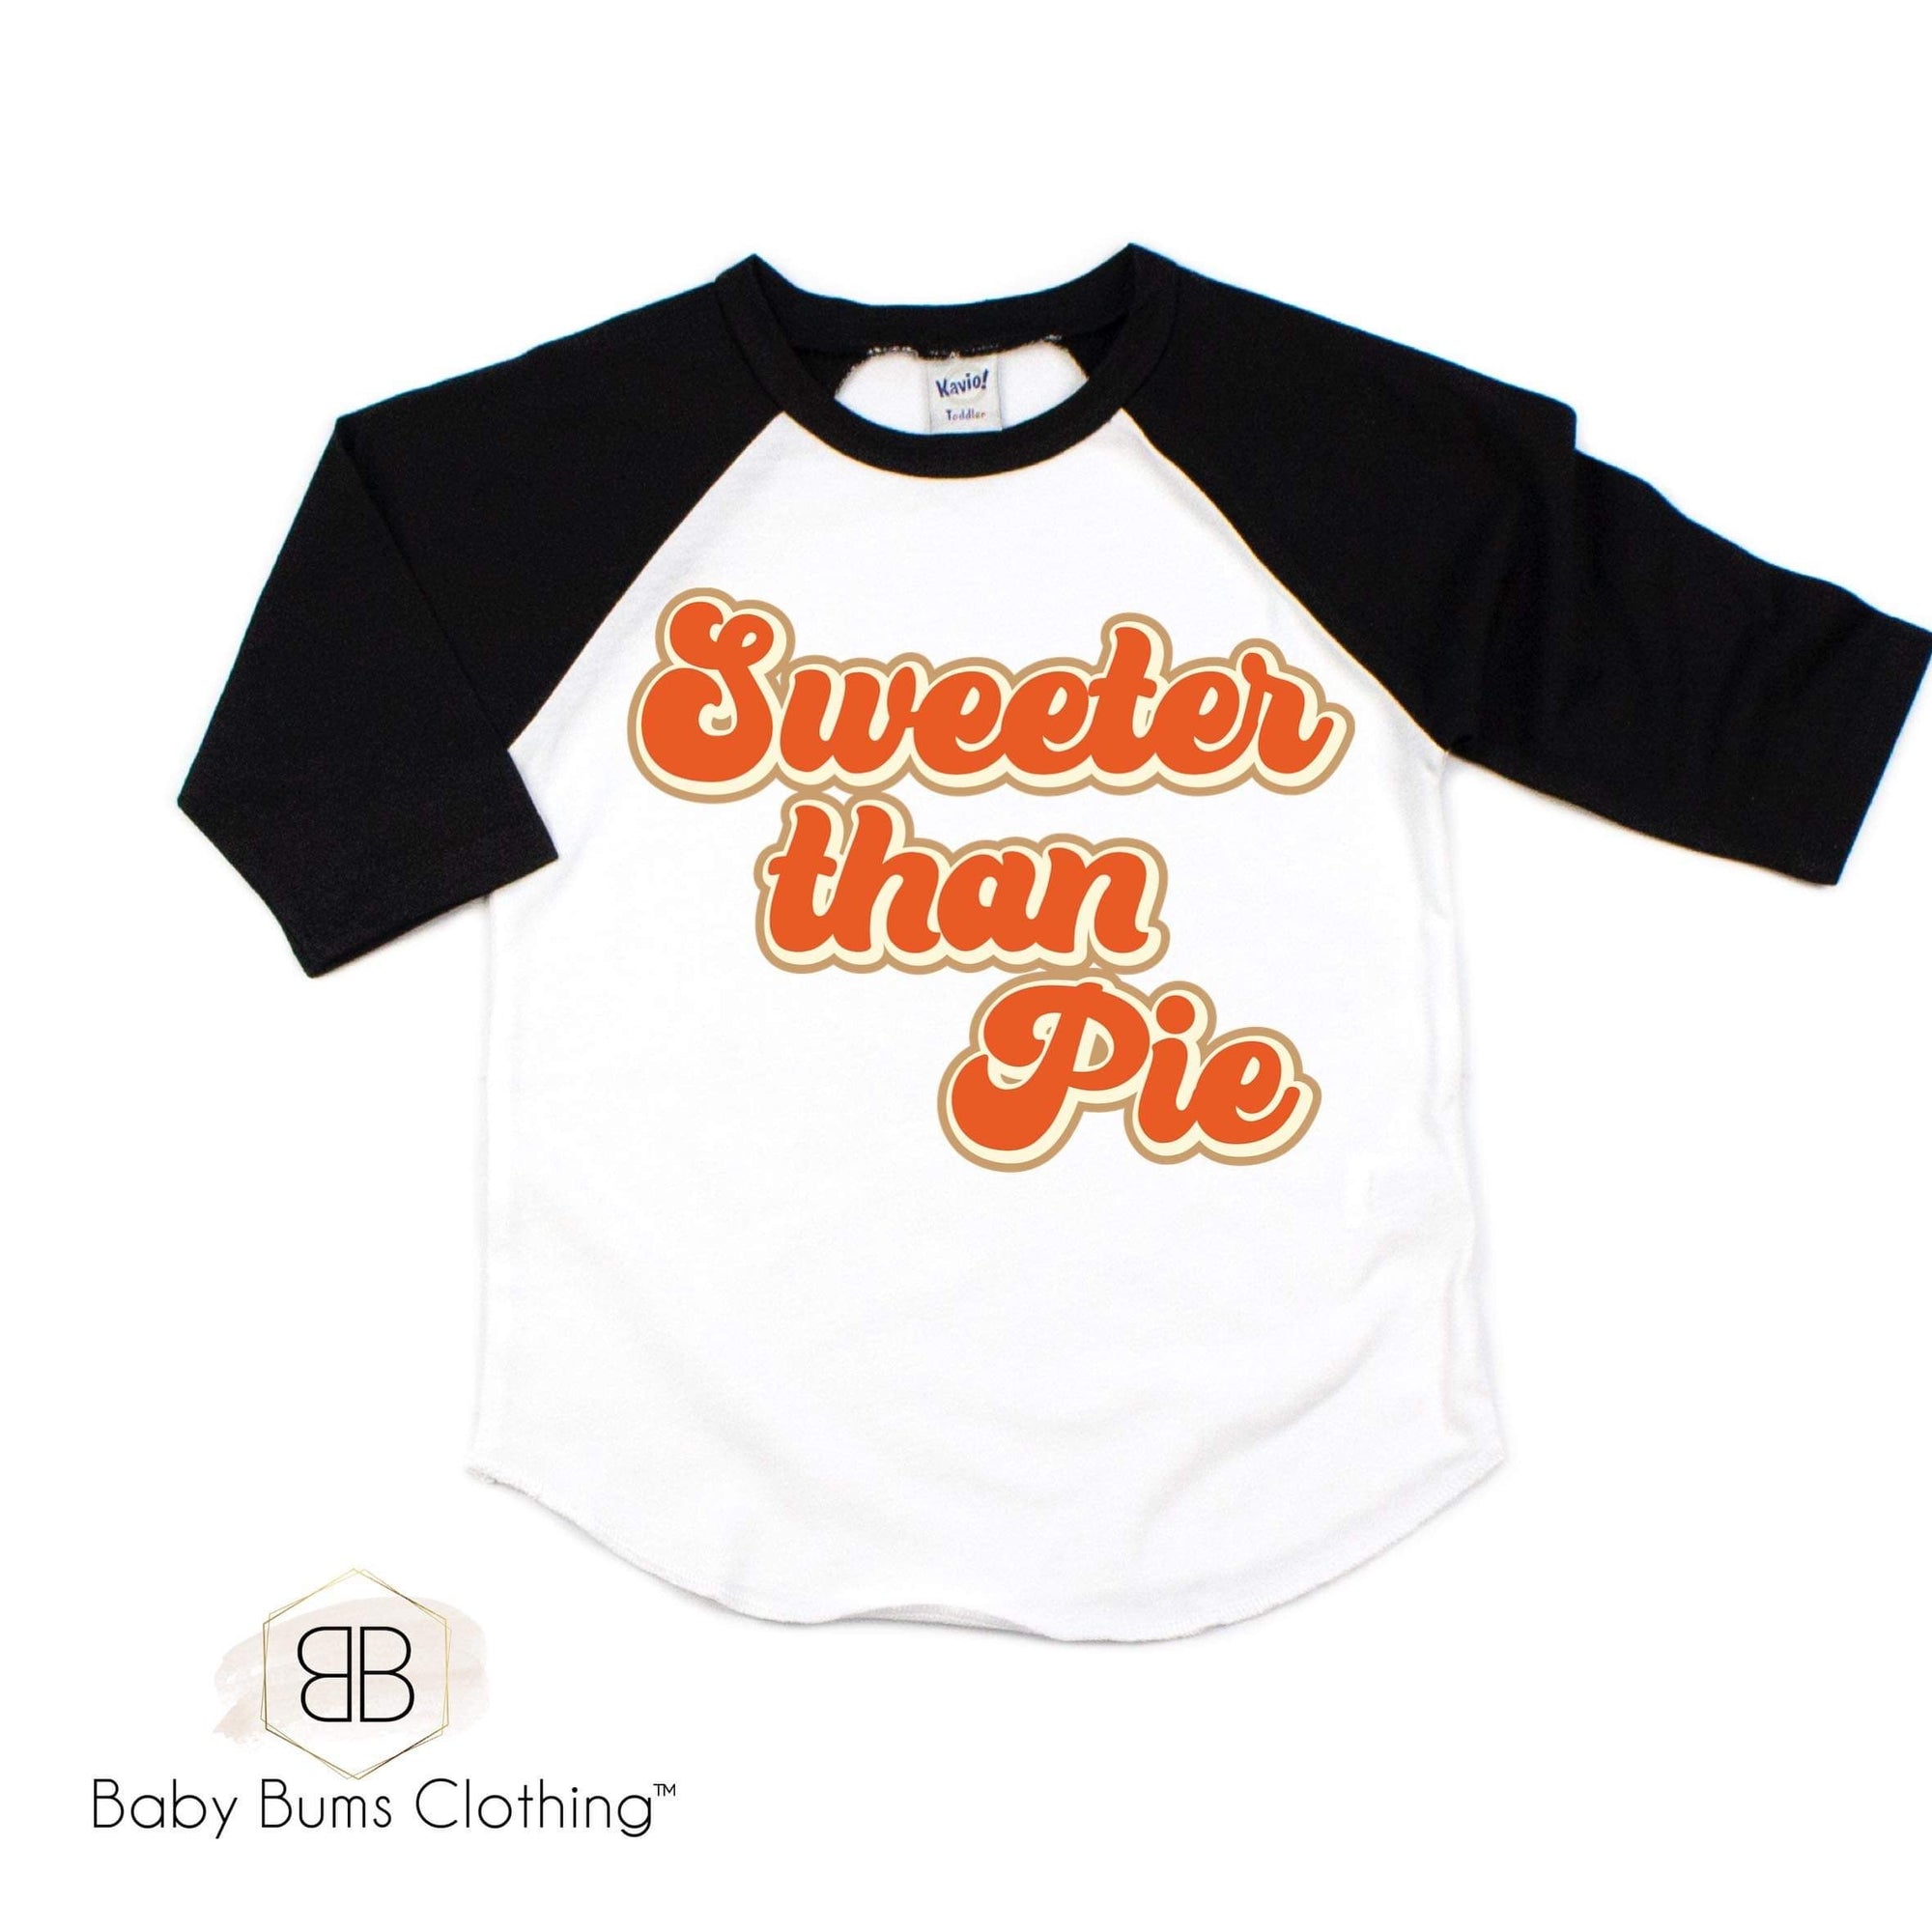 RTS KIDS SWEETER THAN PIE SCREEN TRANSFER - Baby Bums Clothing 